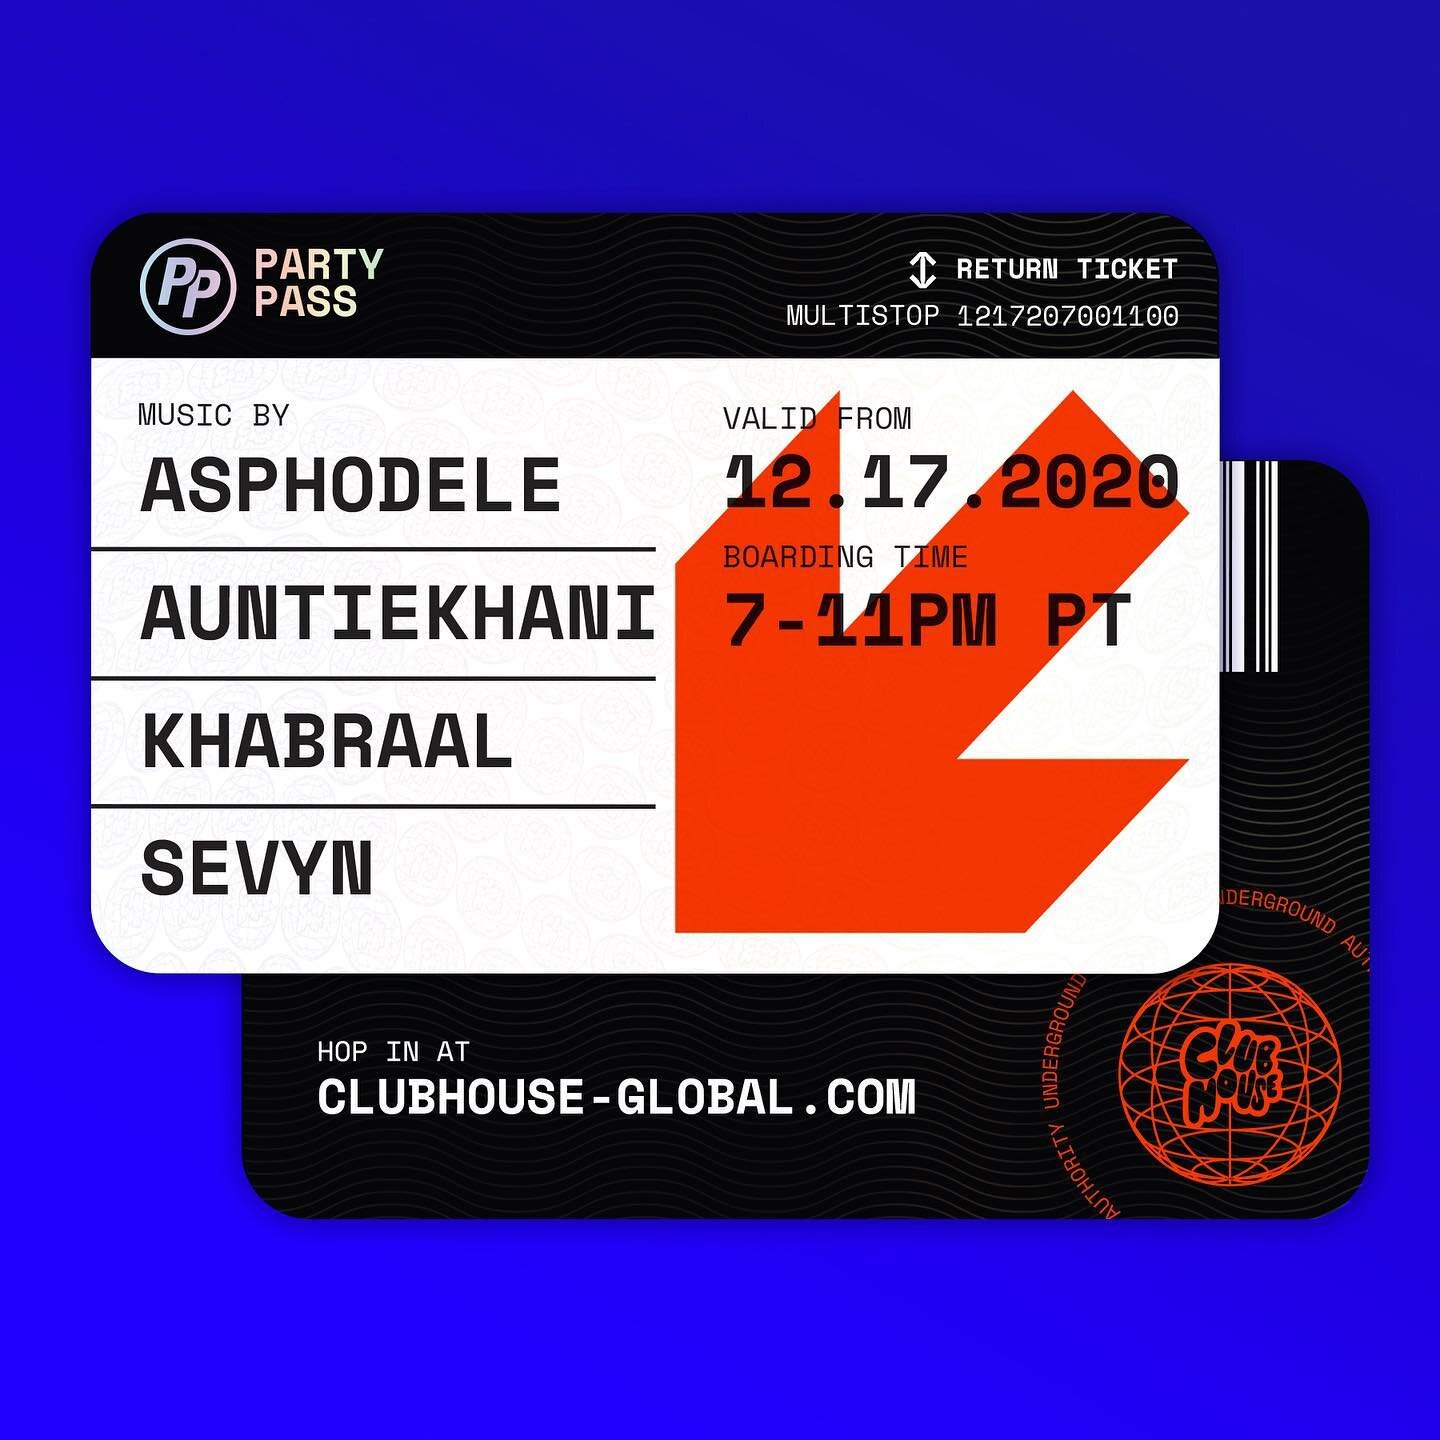 Your return ticket is ready. Party Pass is back to Club House Global. 🎫 
Thursday 7-11pm PT ft @asphodele___ @bae_blade @khabraal @indigosevyn at twitch.tv/clubhouse_global